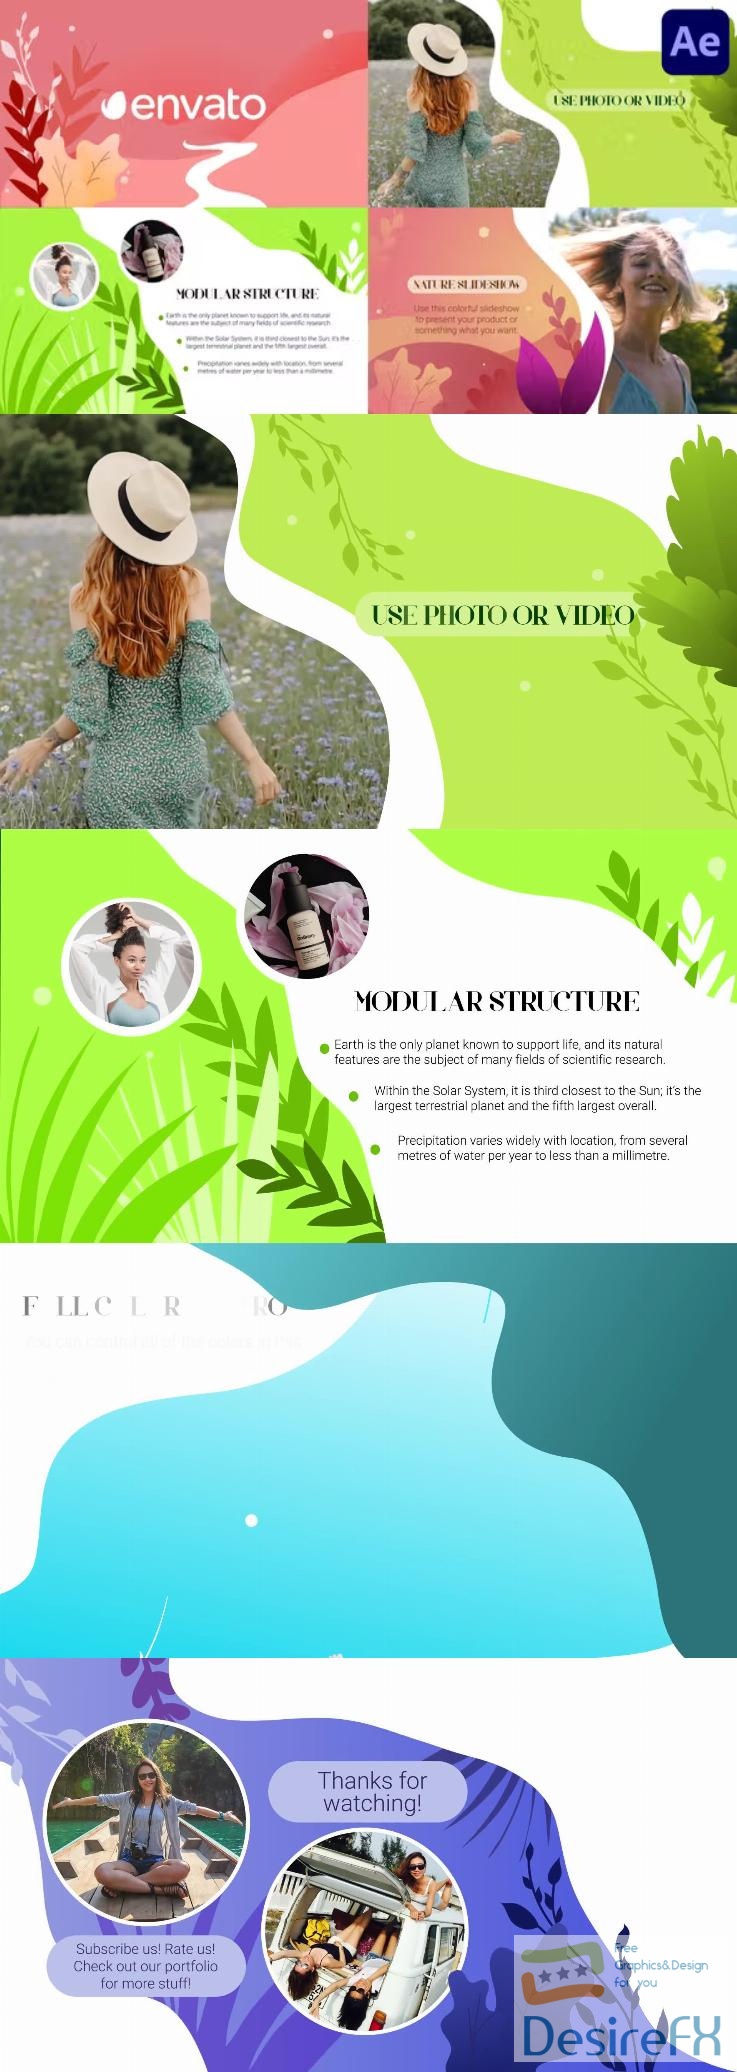 nature after effects template free download